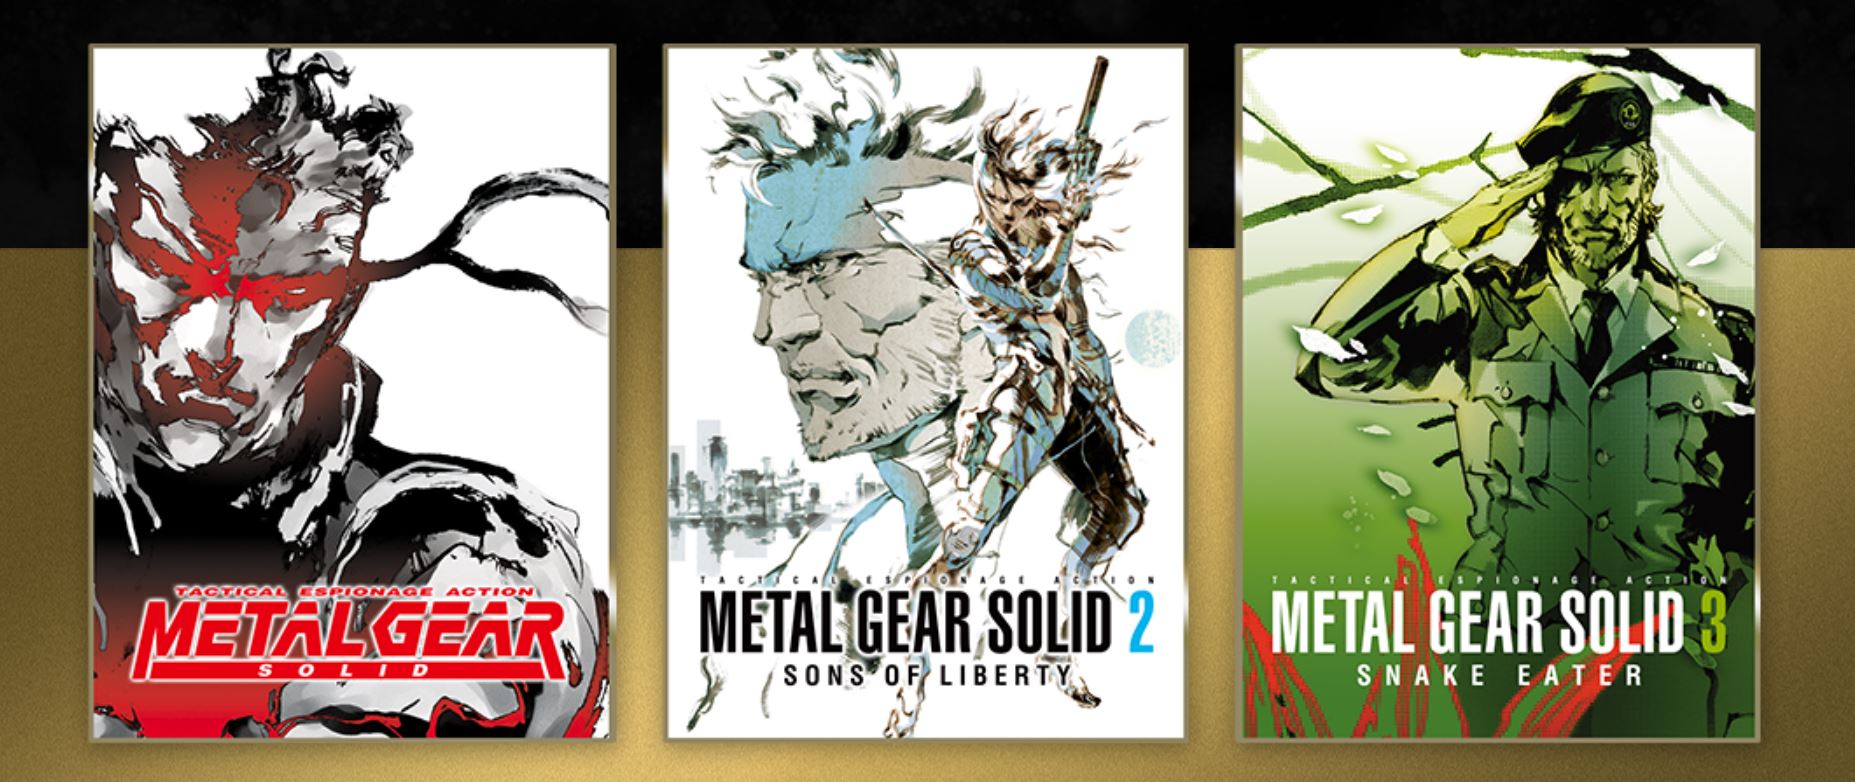 METAL GEAR SOLID 2: Sons of Liberty - Master Collection Version